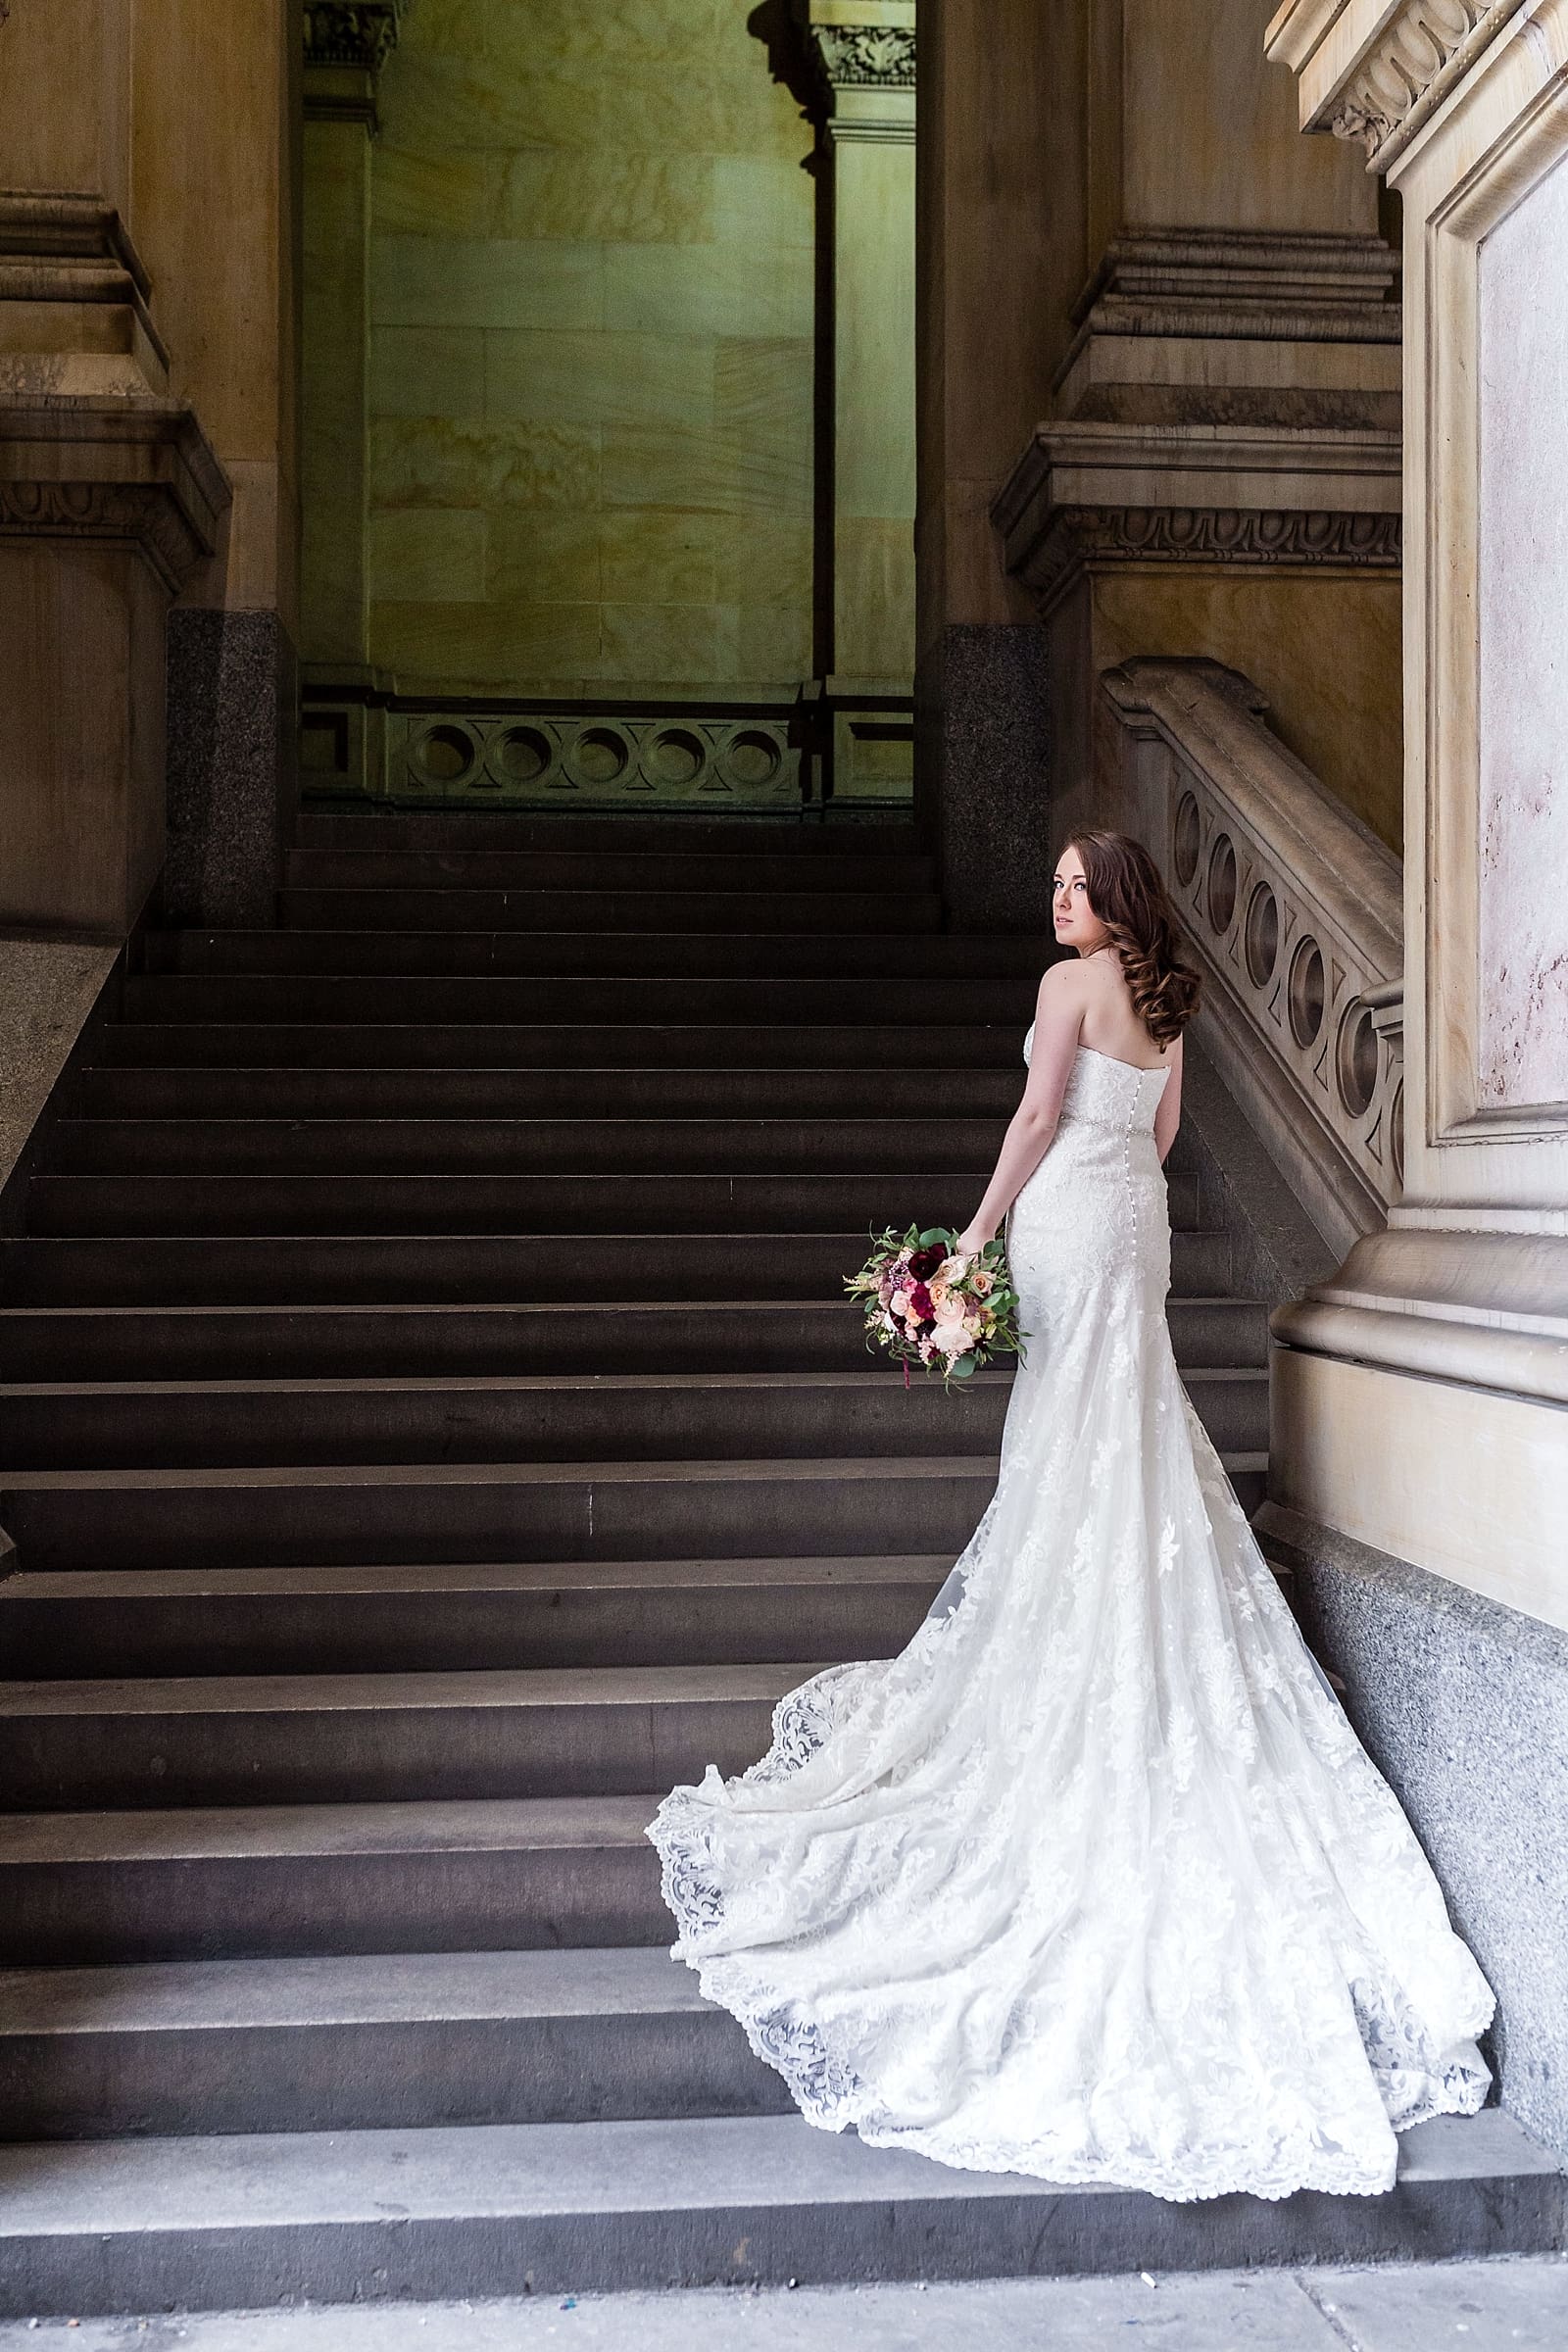 Dramatic bridal portrait from behind with long dress train and bouquet in the stairwell, college of physicians wedding